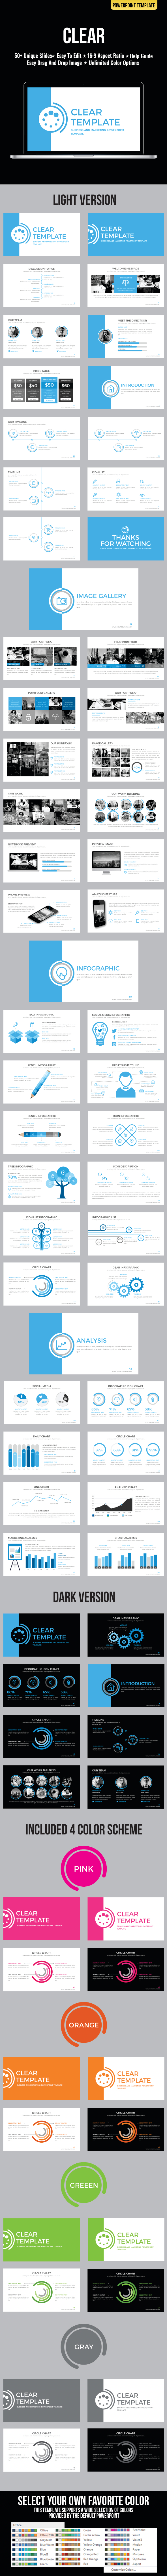 Clear Powerpoint Template